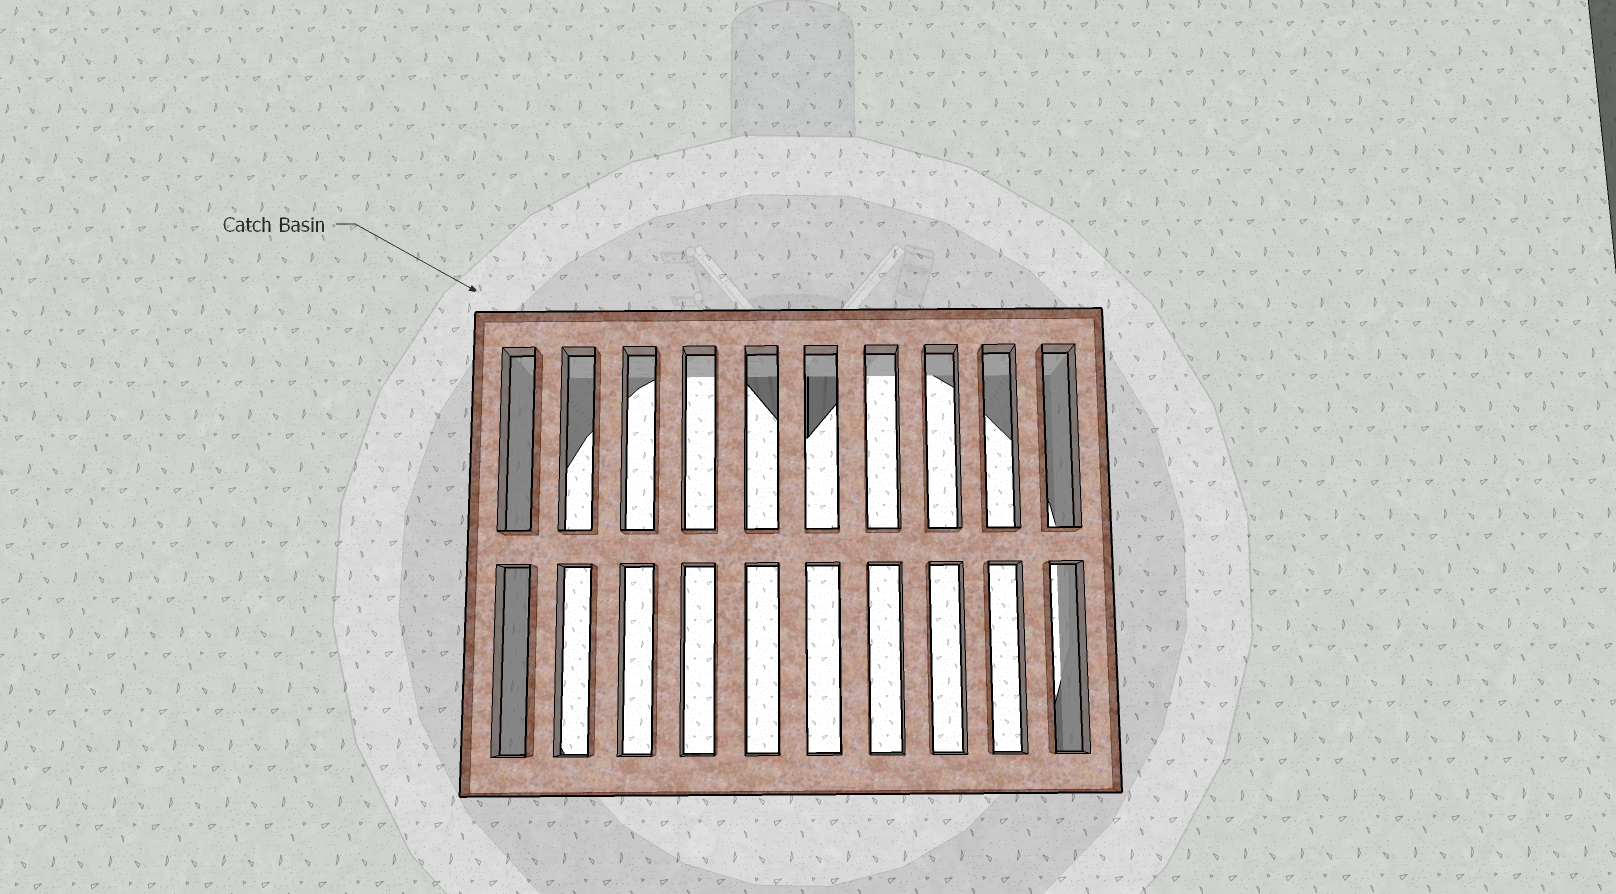 Top View with Grate and Asphalt - Translucent.png